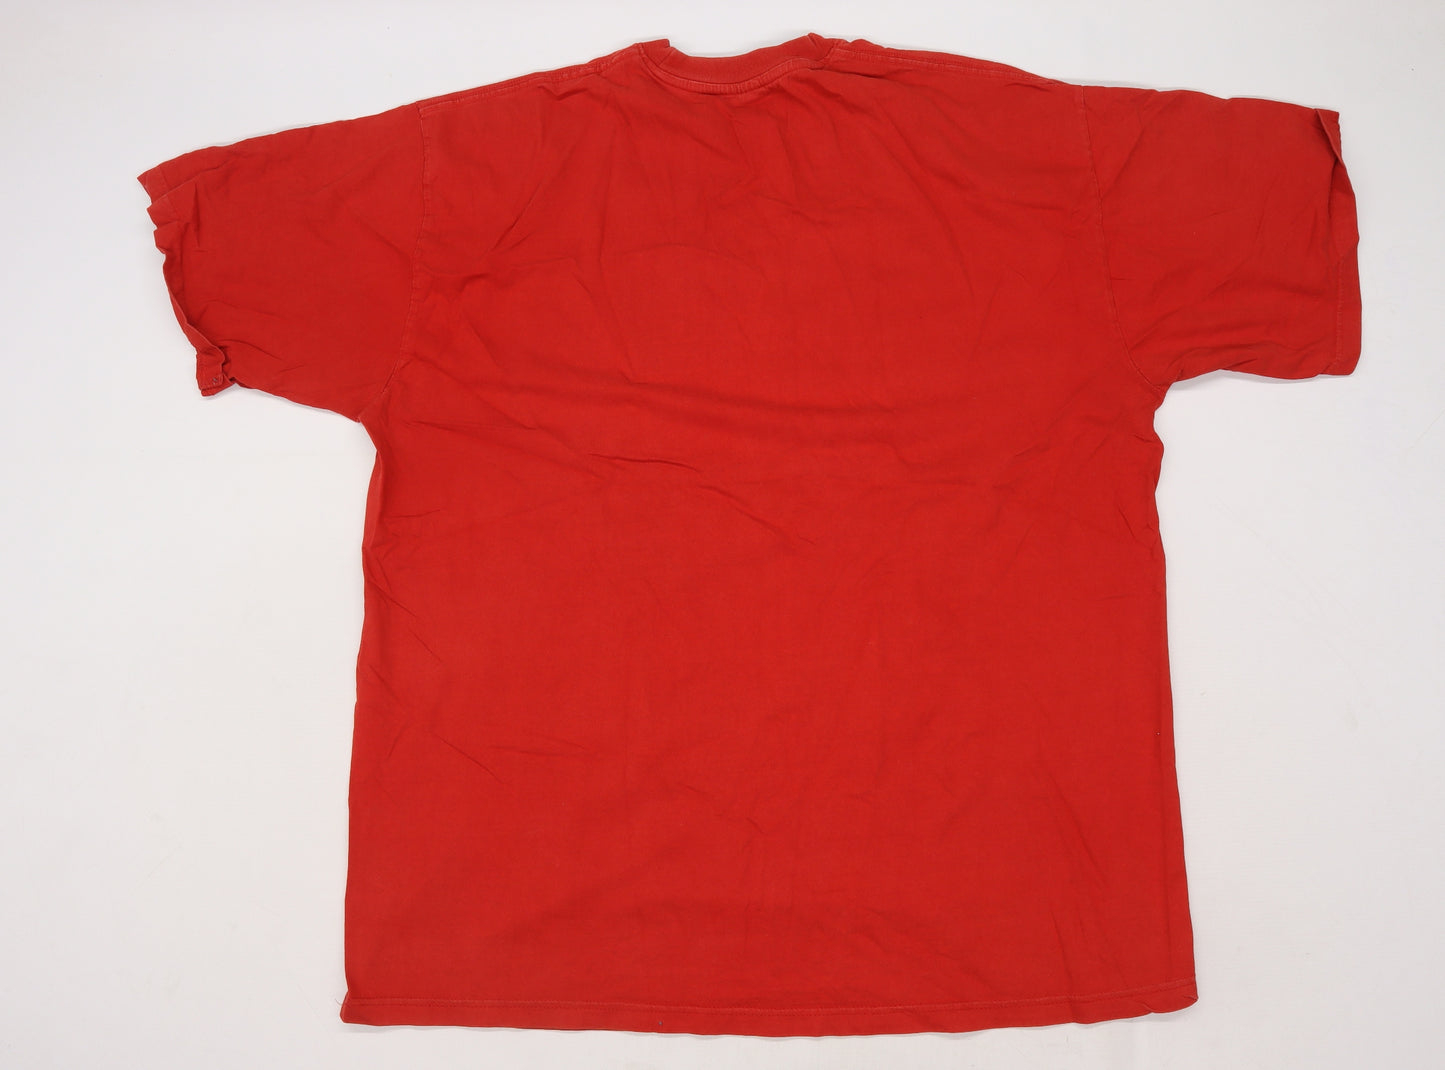 Phat dog Mens Red    T-Shirt Size 4XL  - Graphic